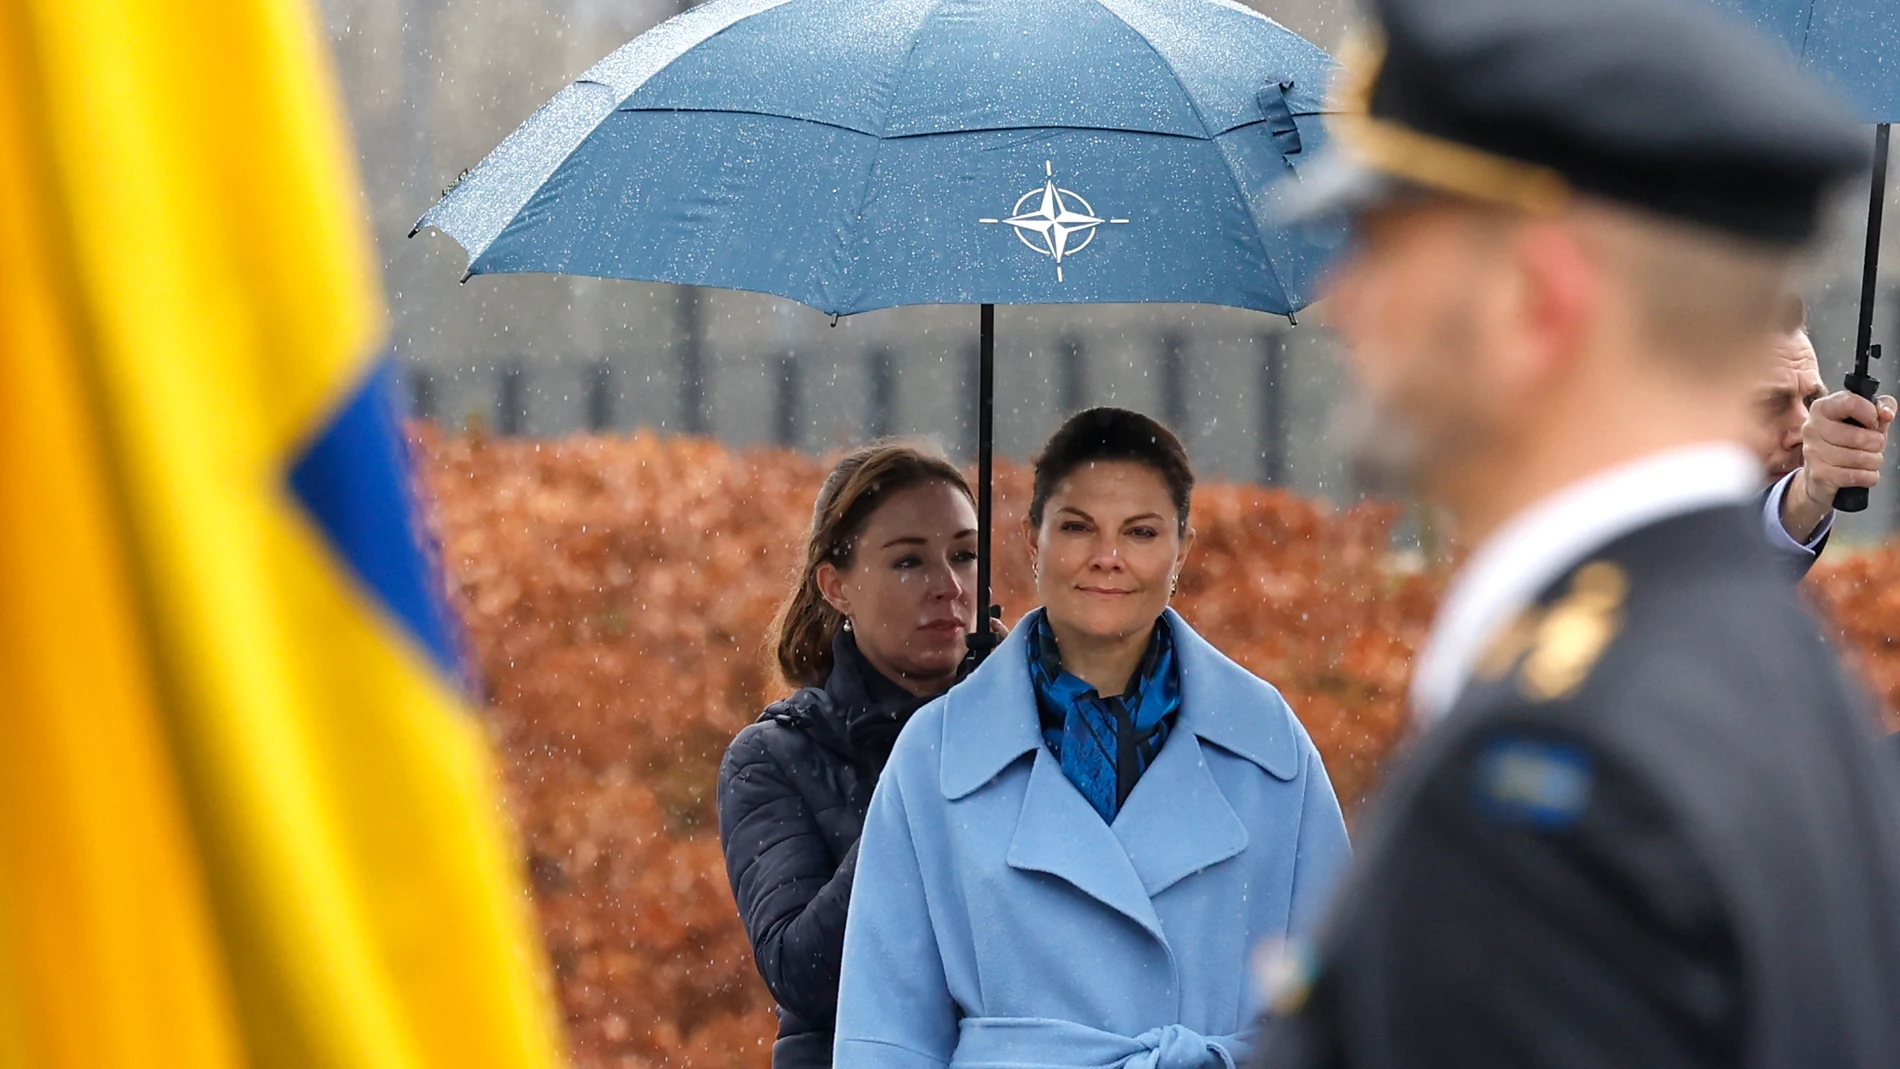 Sweden's Crown Princess Victoria, center, watches as members of the military prepare to raise the flag of Sweden during a ceremony to mark the accession of Sweden to NATO at NATO headquarters in Brussels, Monday, March 11, 2024. (AP Photo/Geert Vanden Wijngaert)